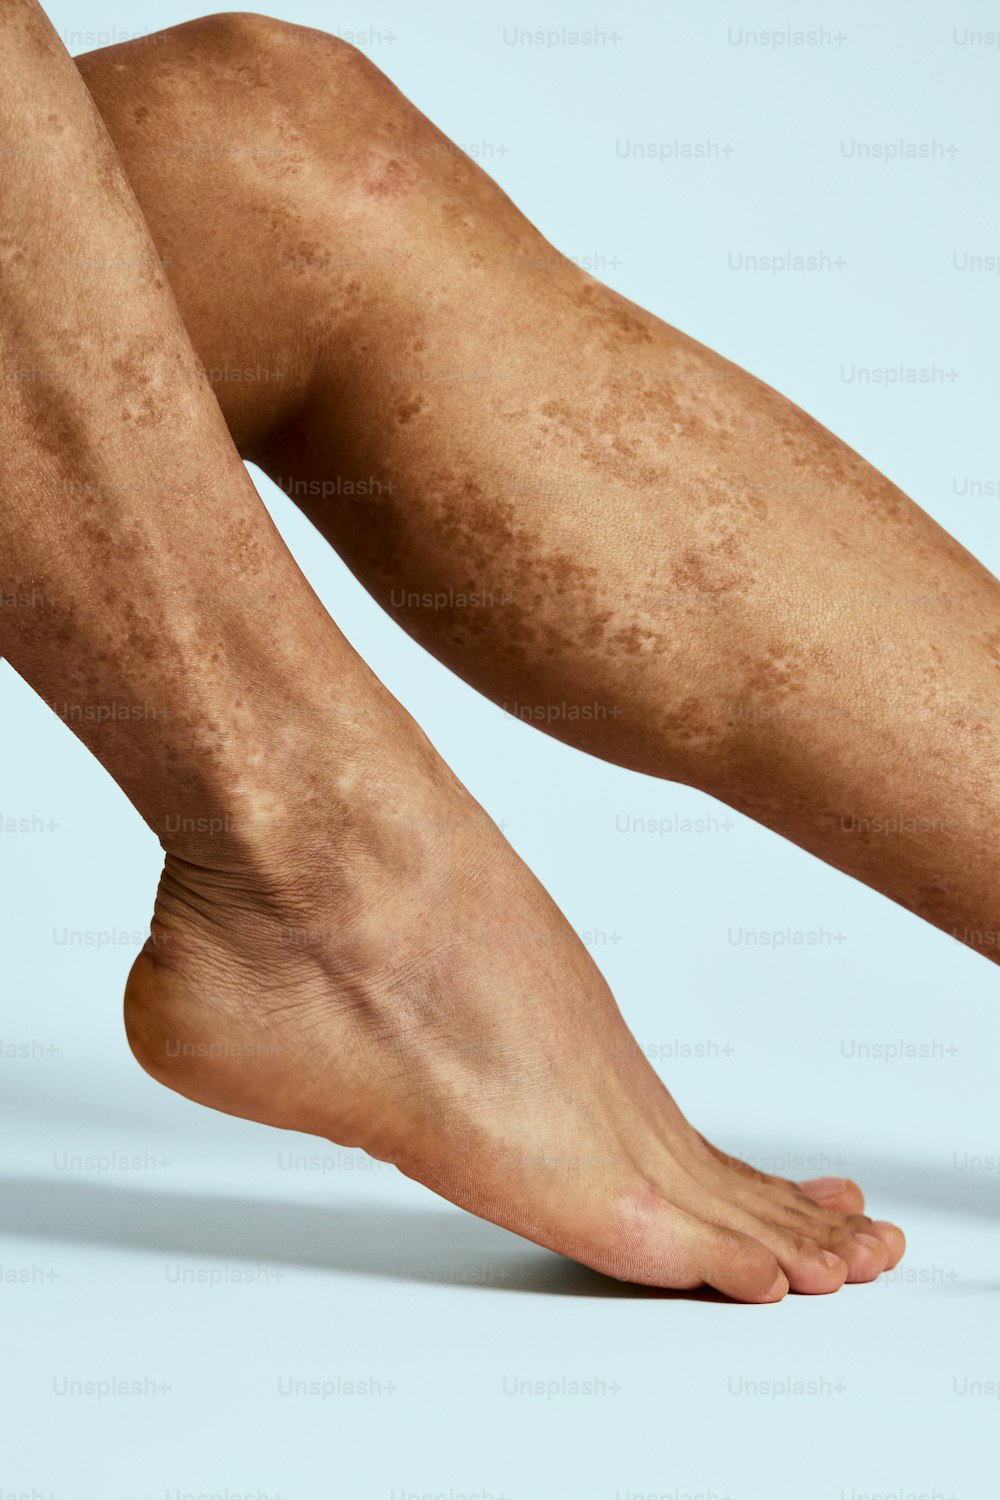 a close up of a person's legs and legs